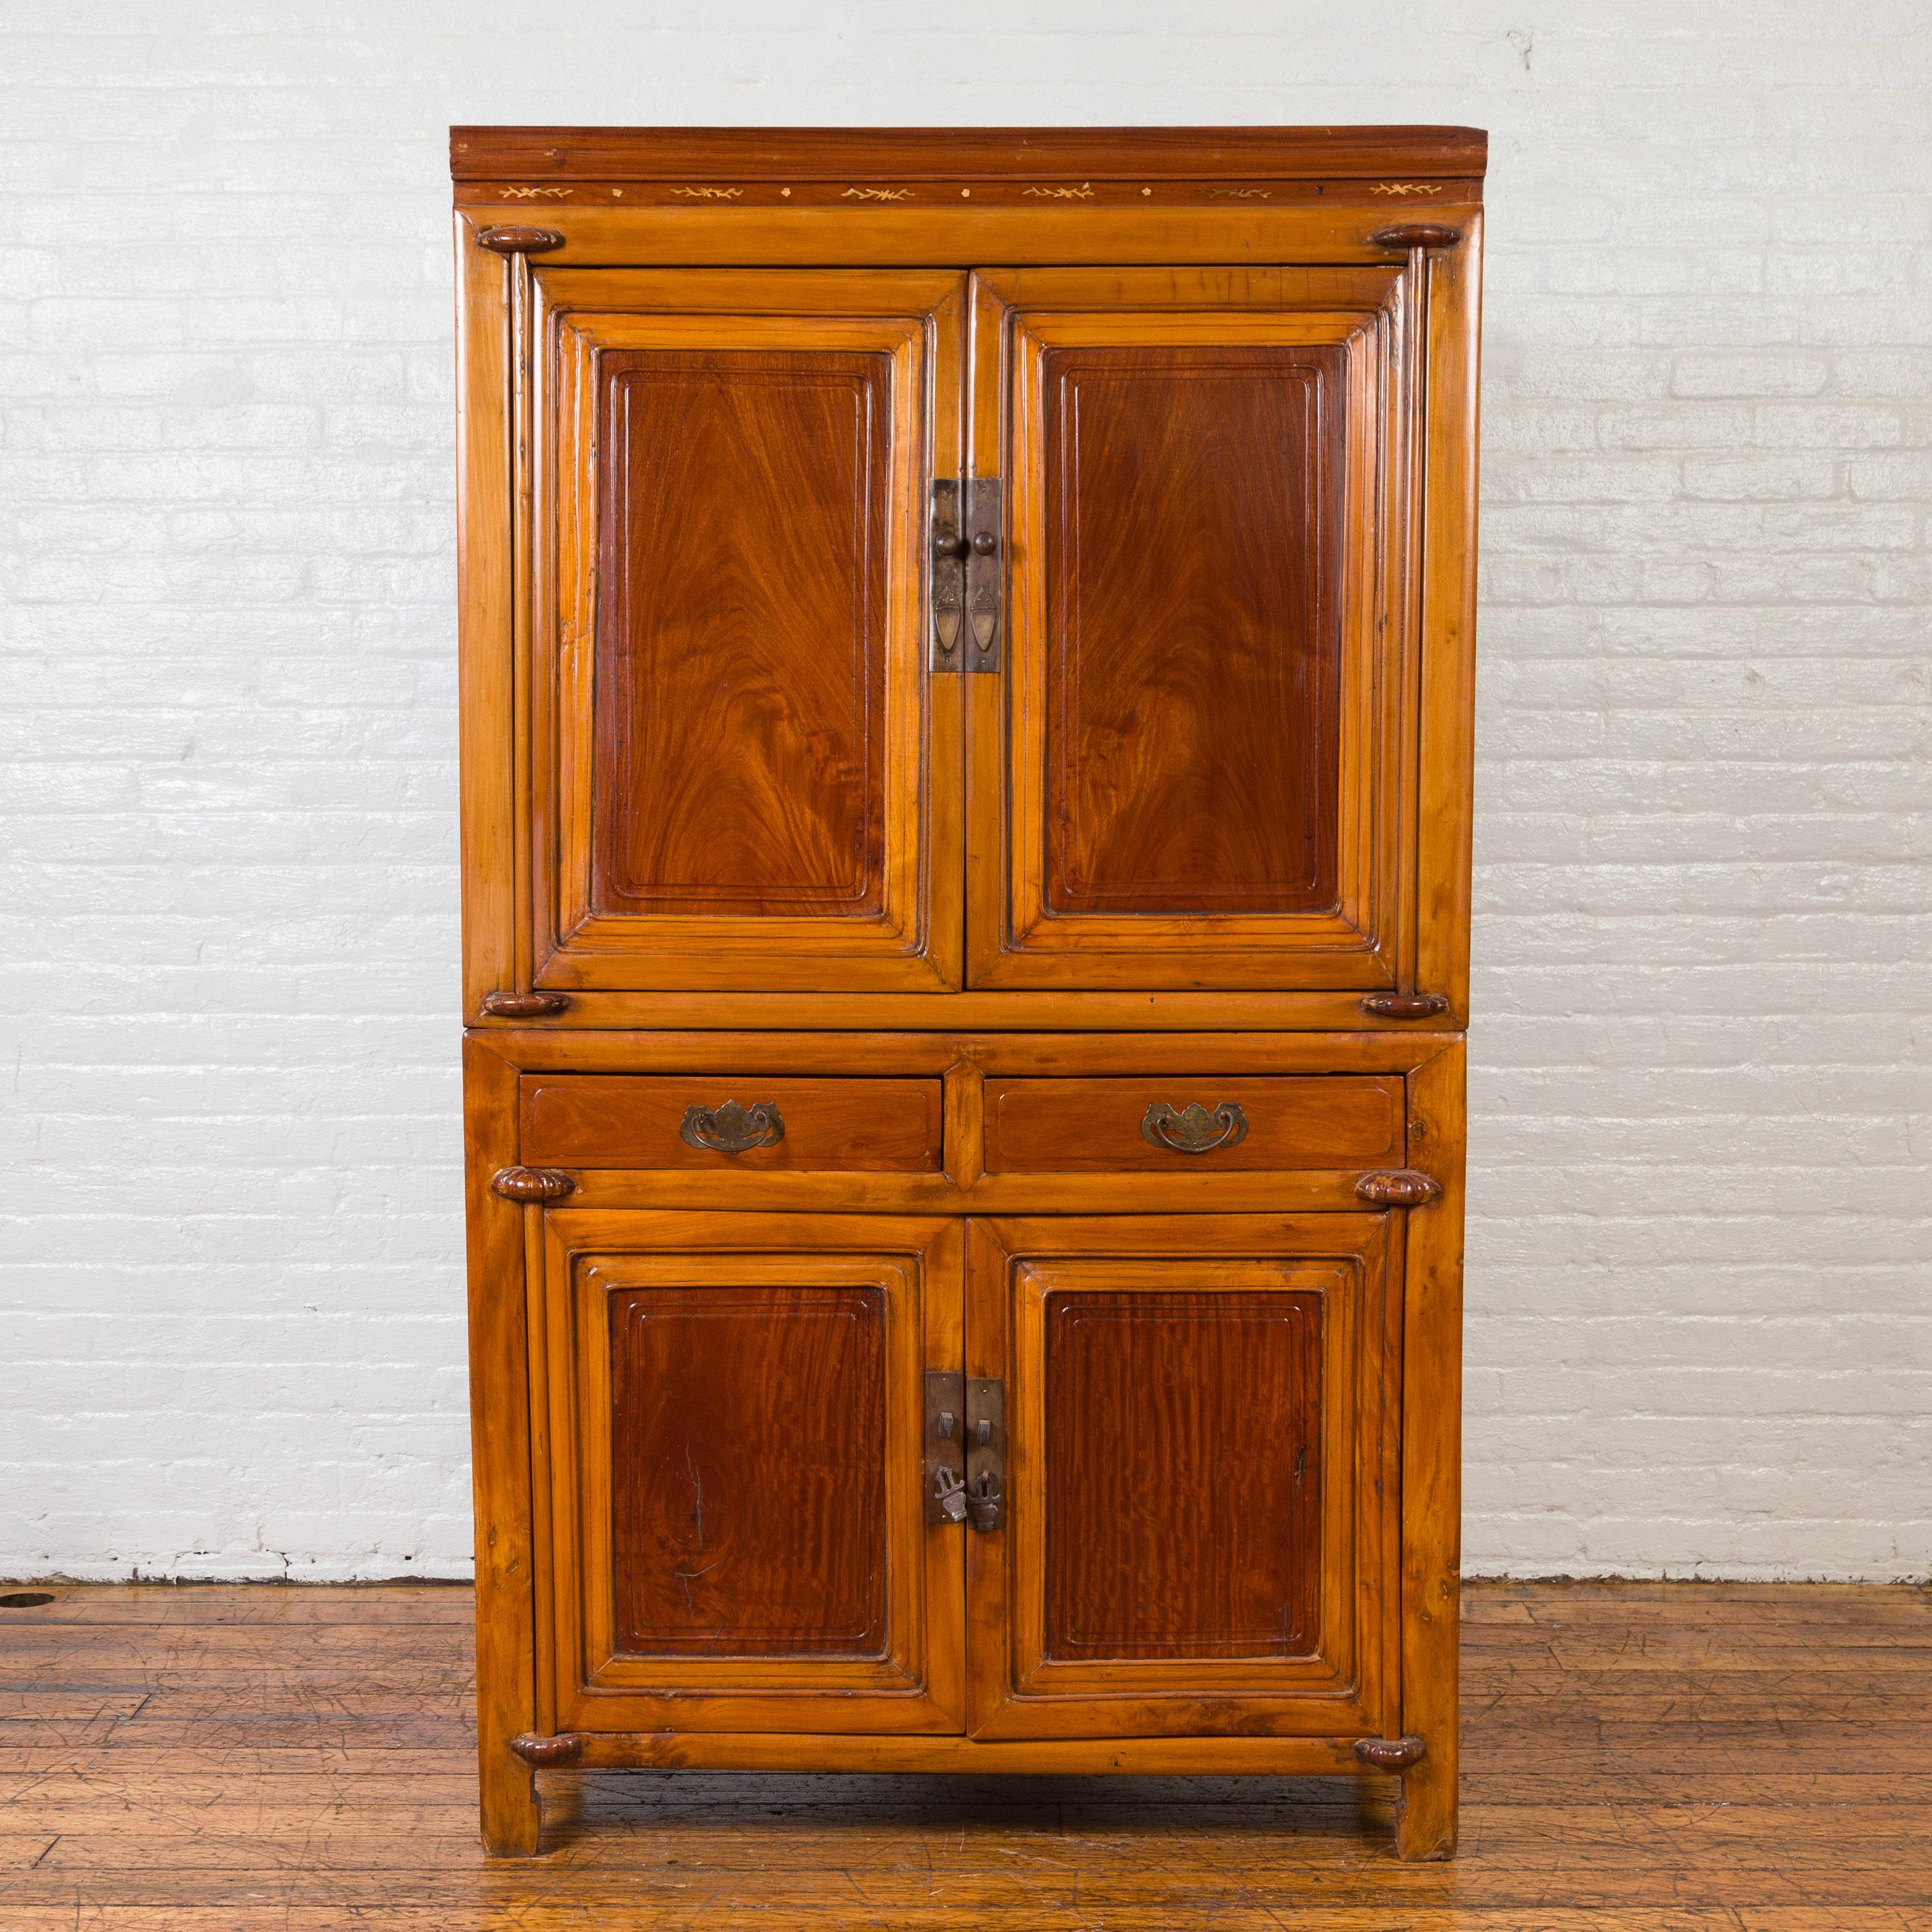 An antique Chinese two-toned stacking cabinet from the early 20th century, with doors and drawers. Found in Taiwan, this Chinese cabinet attracts our attention with its two-toned patina that highlights the panelled doors beautifully. Presenting a